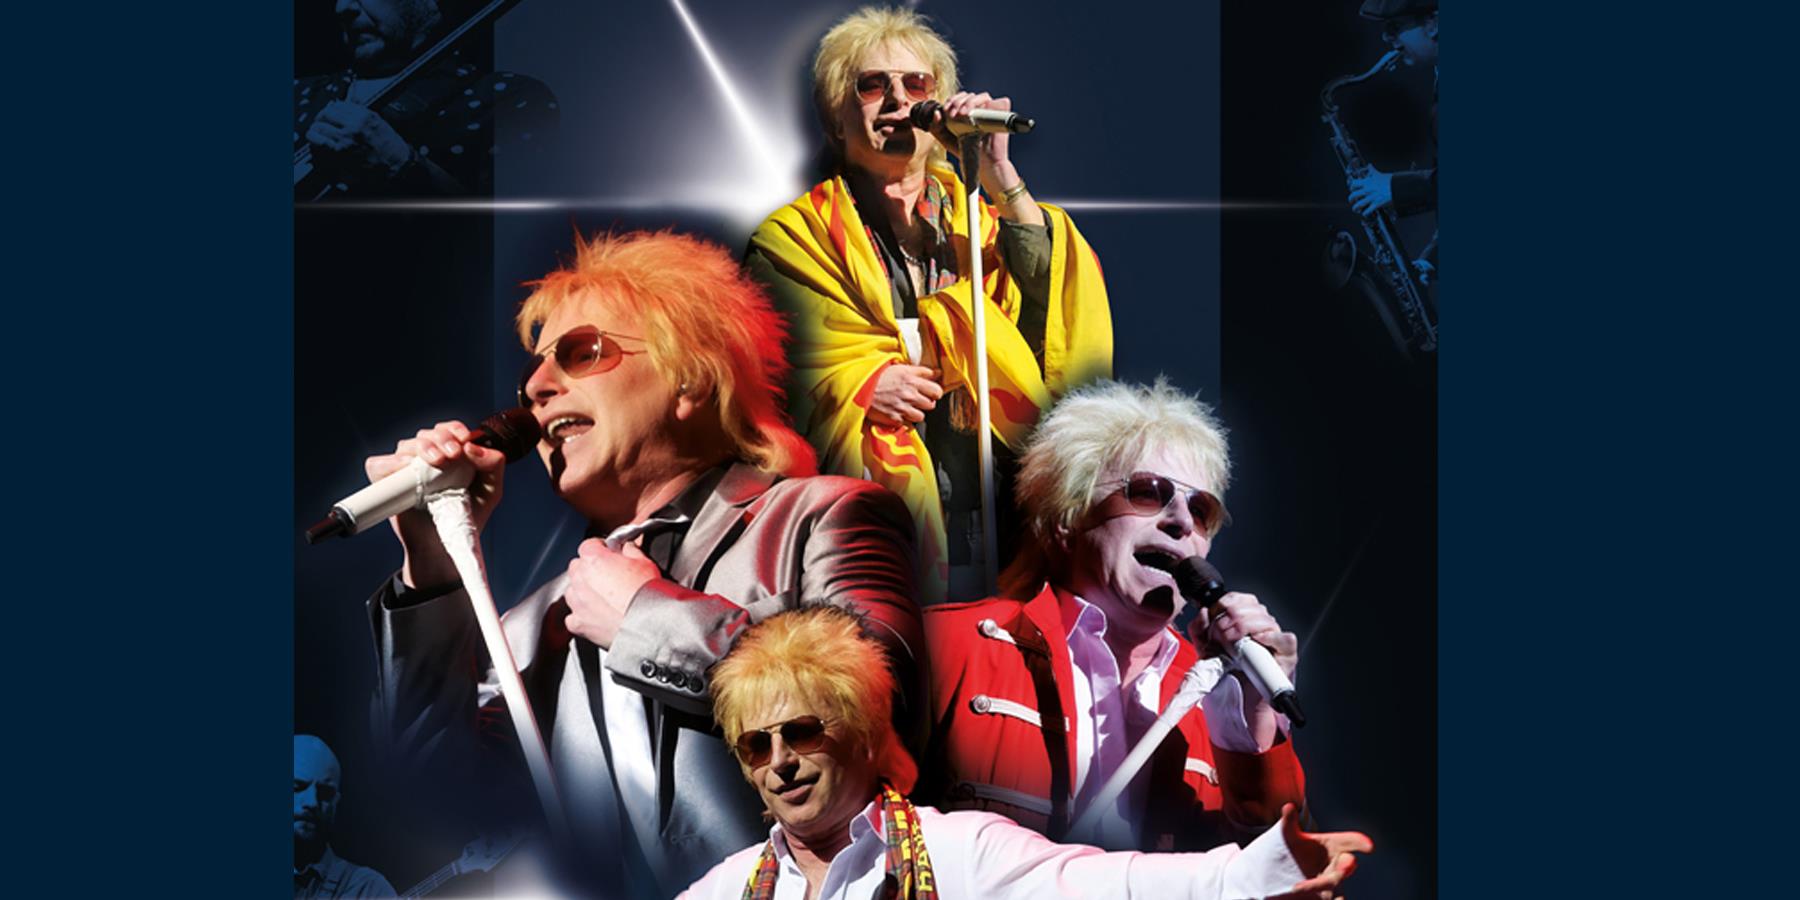 Pictures of a Rod Stewart impersonator singing